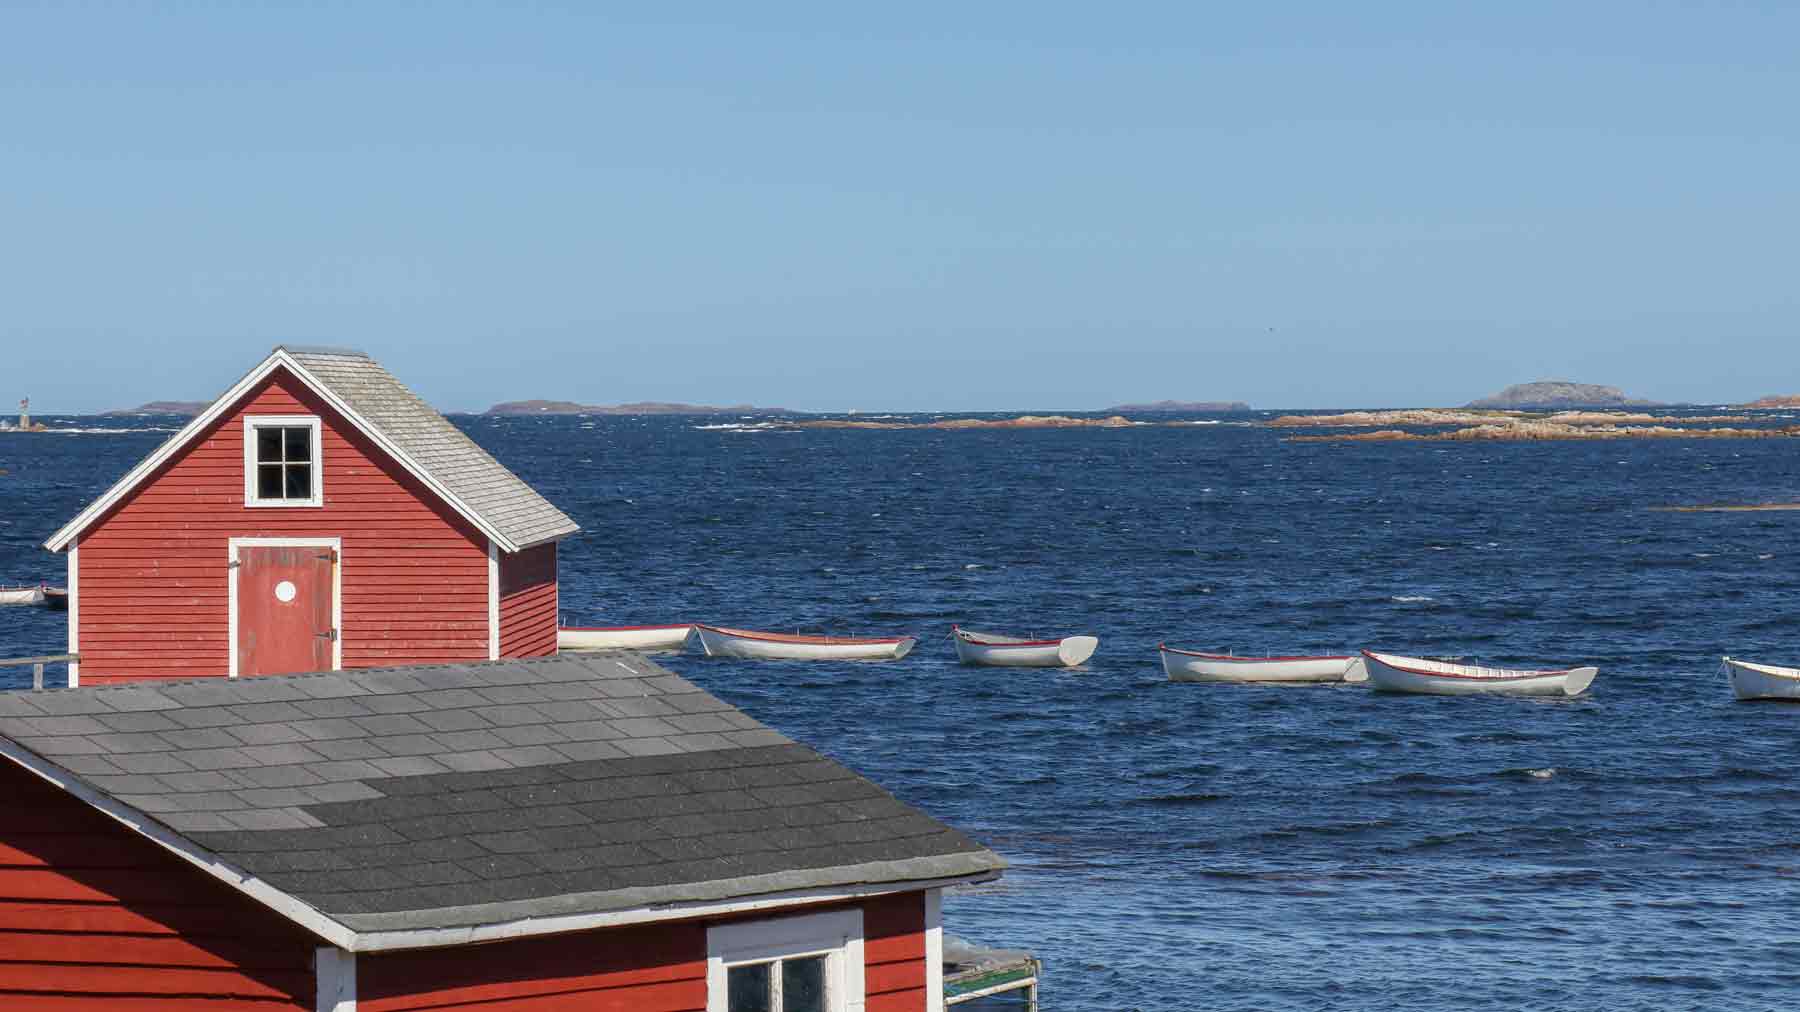 Red wooden fishermen's sheds in front of the ocean on Fogo Island